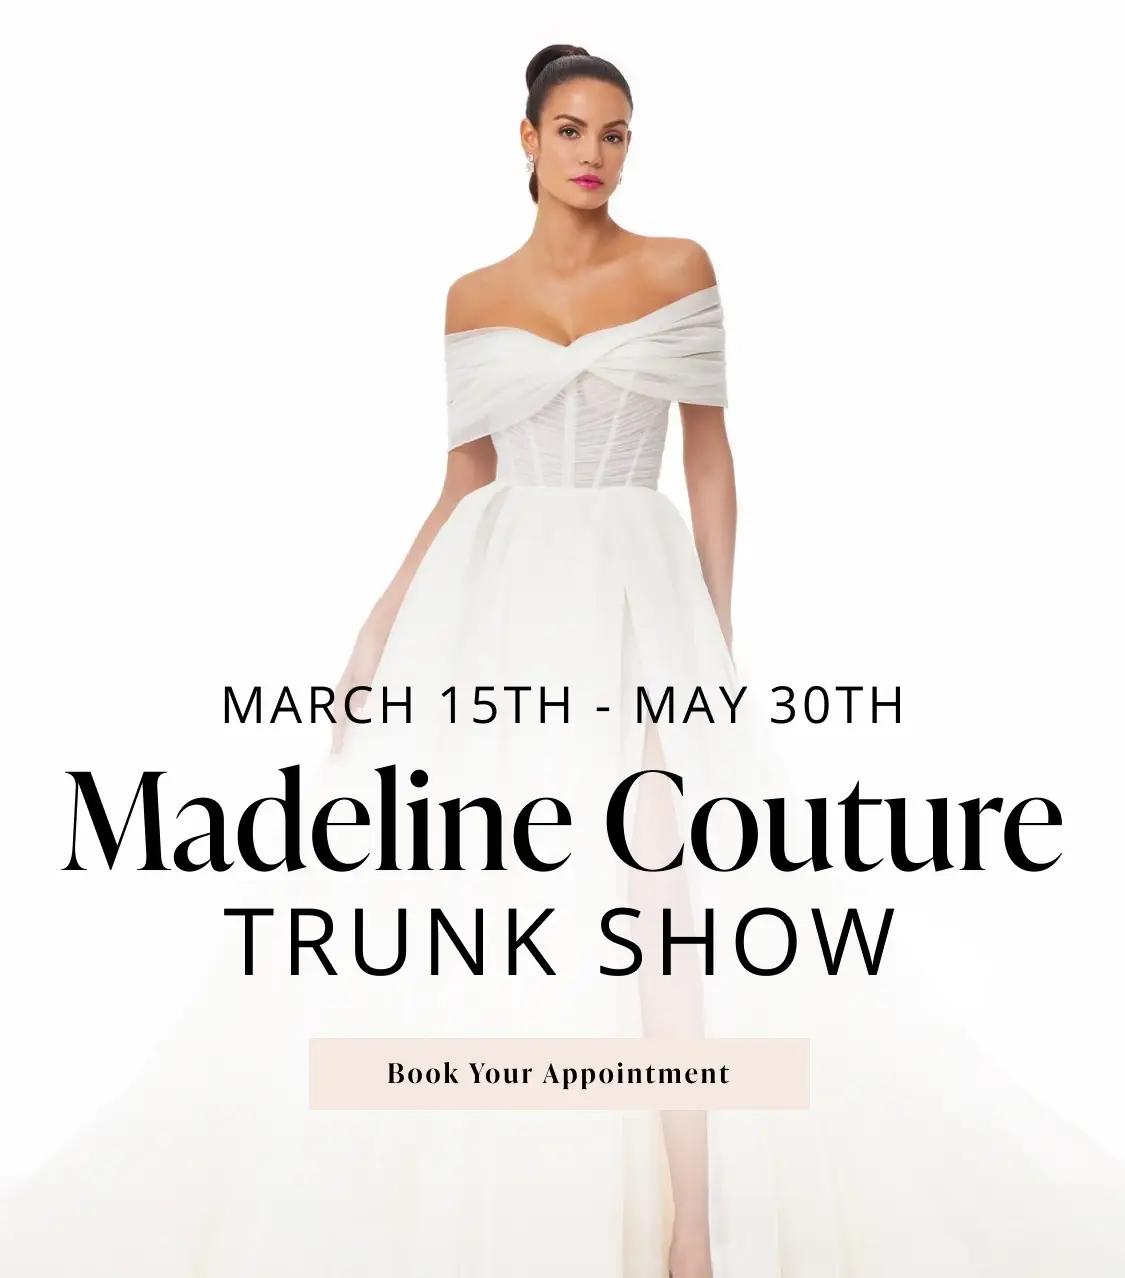 Madeline Couture Trunk Show Banner Mobile